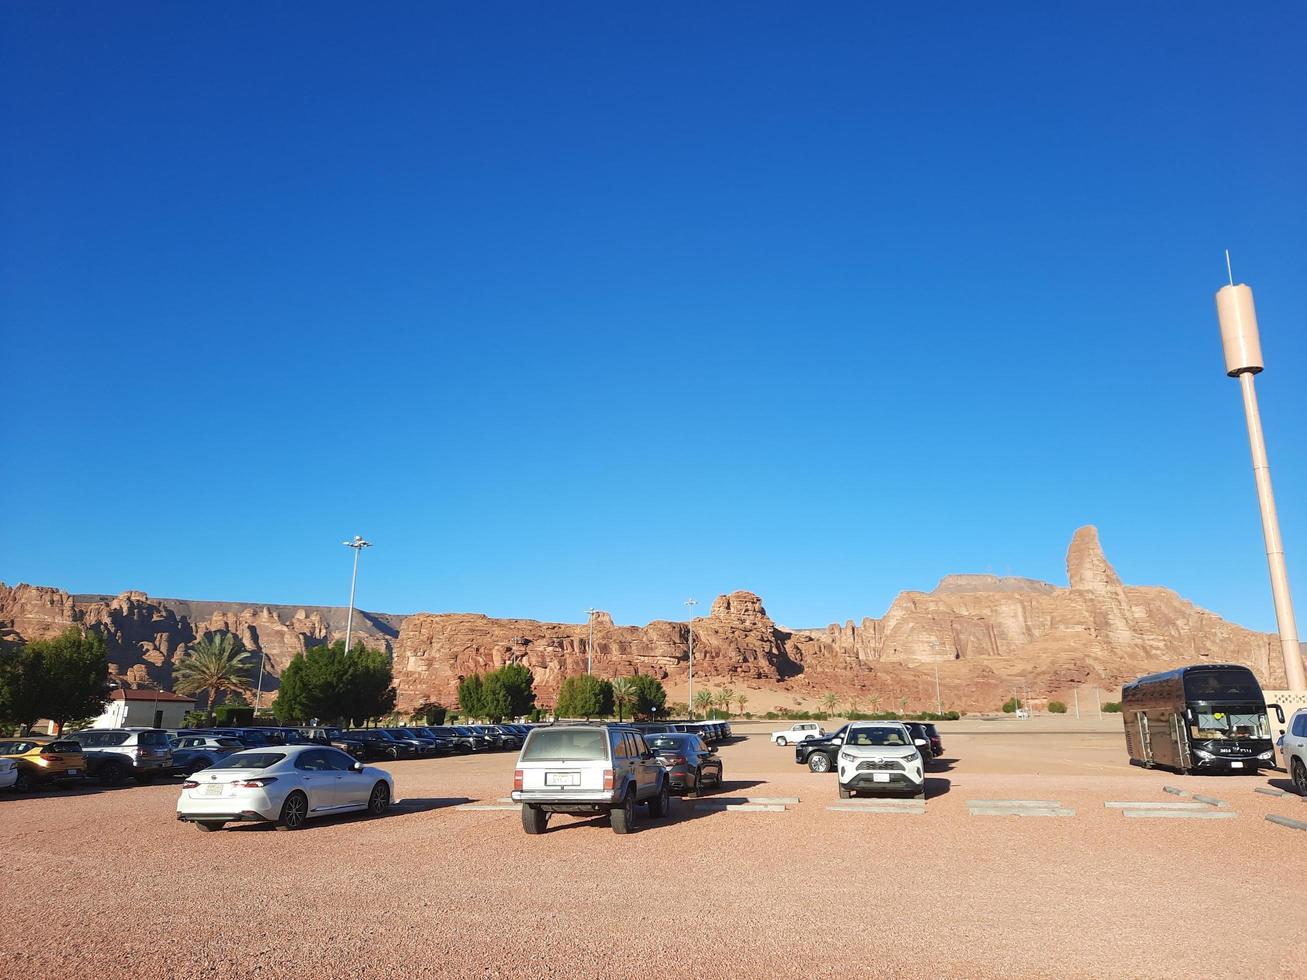 Al Ula, Saudi Arabia, March 2023 - Jeeps are parked at different places in the desert to take tourists to different places during the day in Al Ula, Saudi Arabia. photo